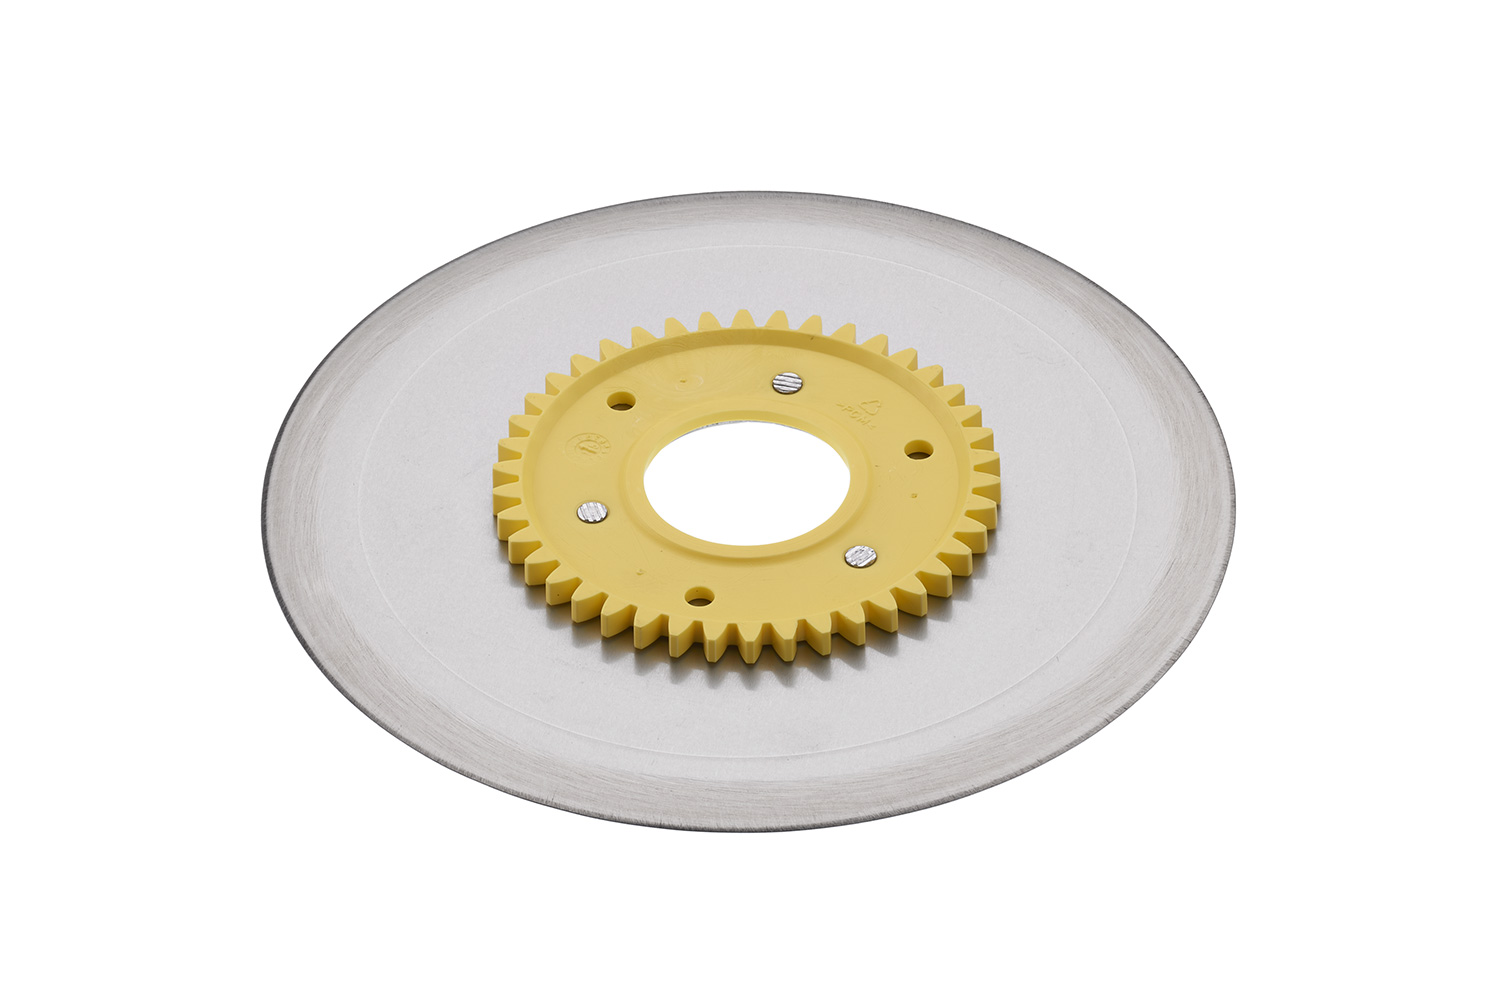 Standard ham- and sausage circular blade with a yellow gear